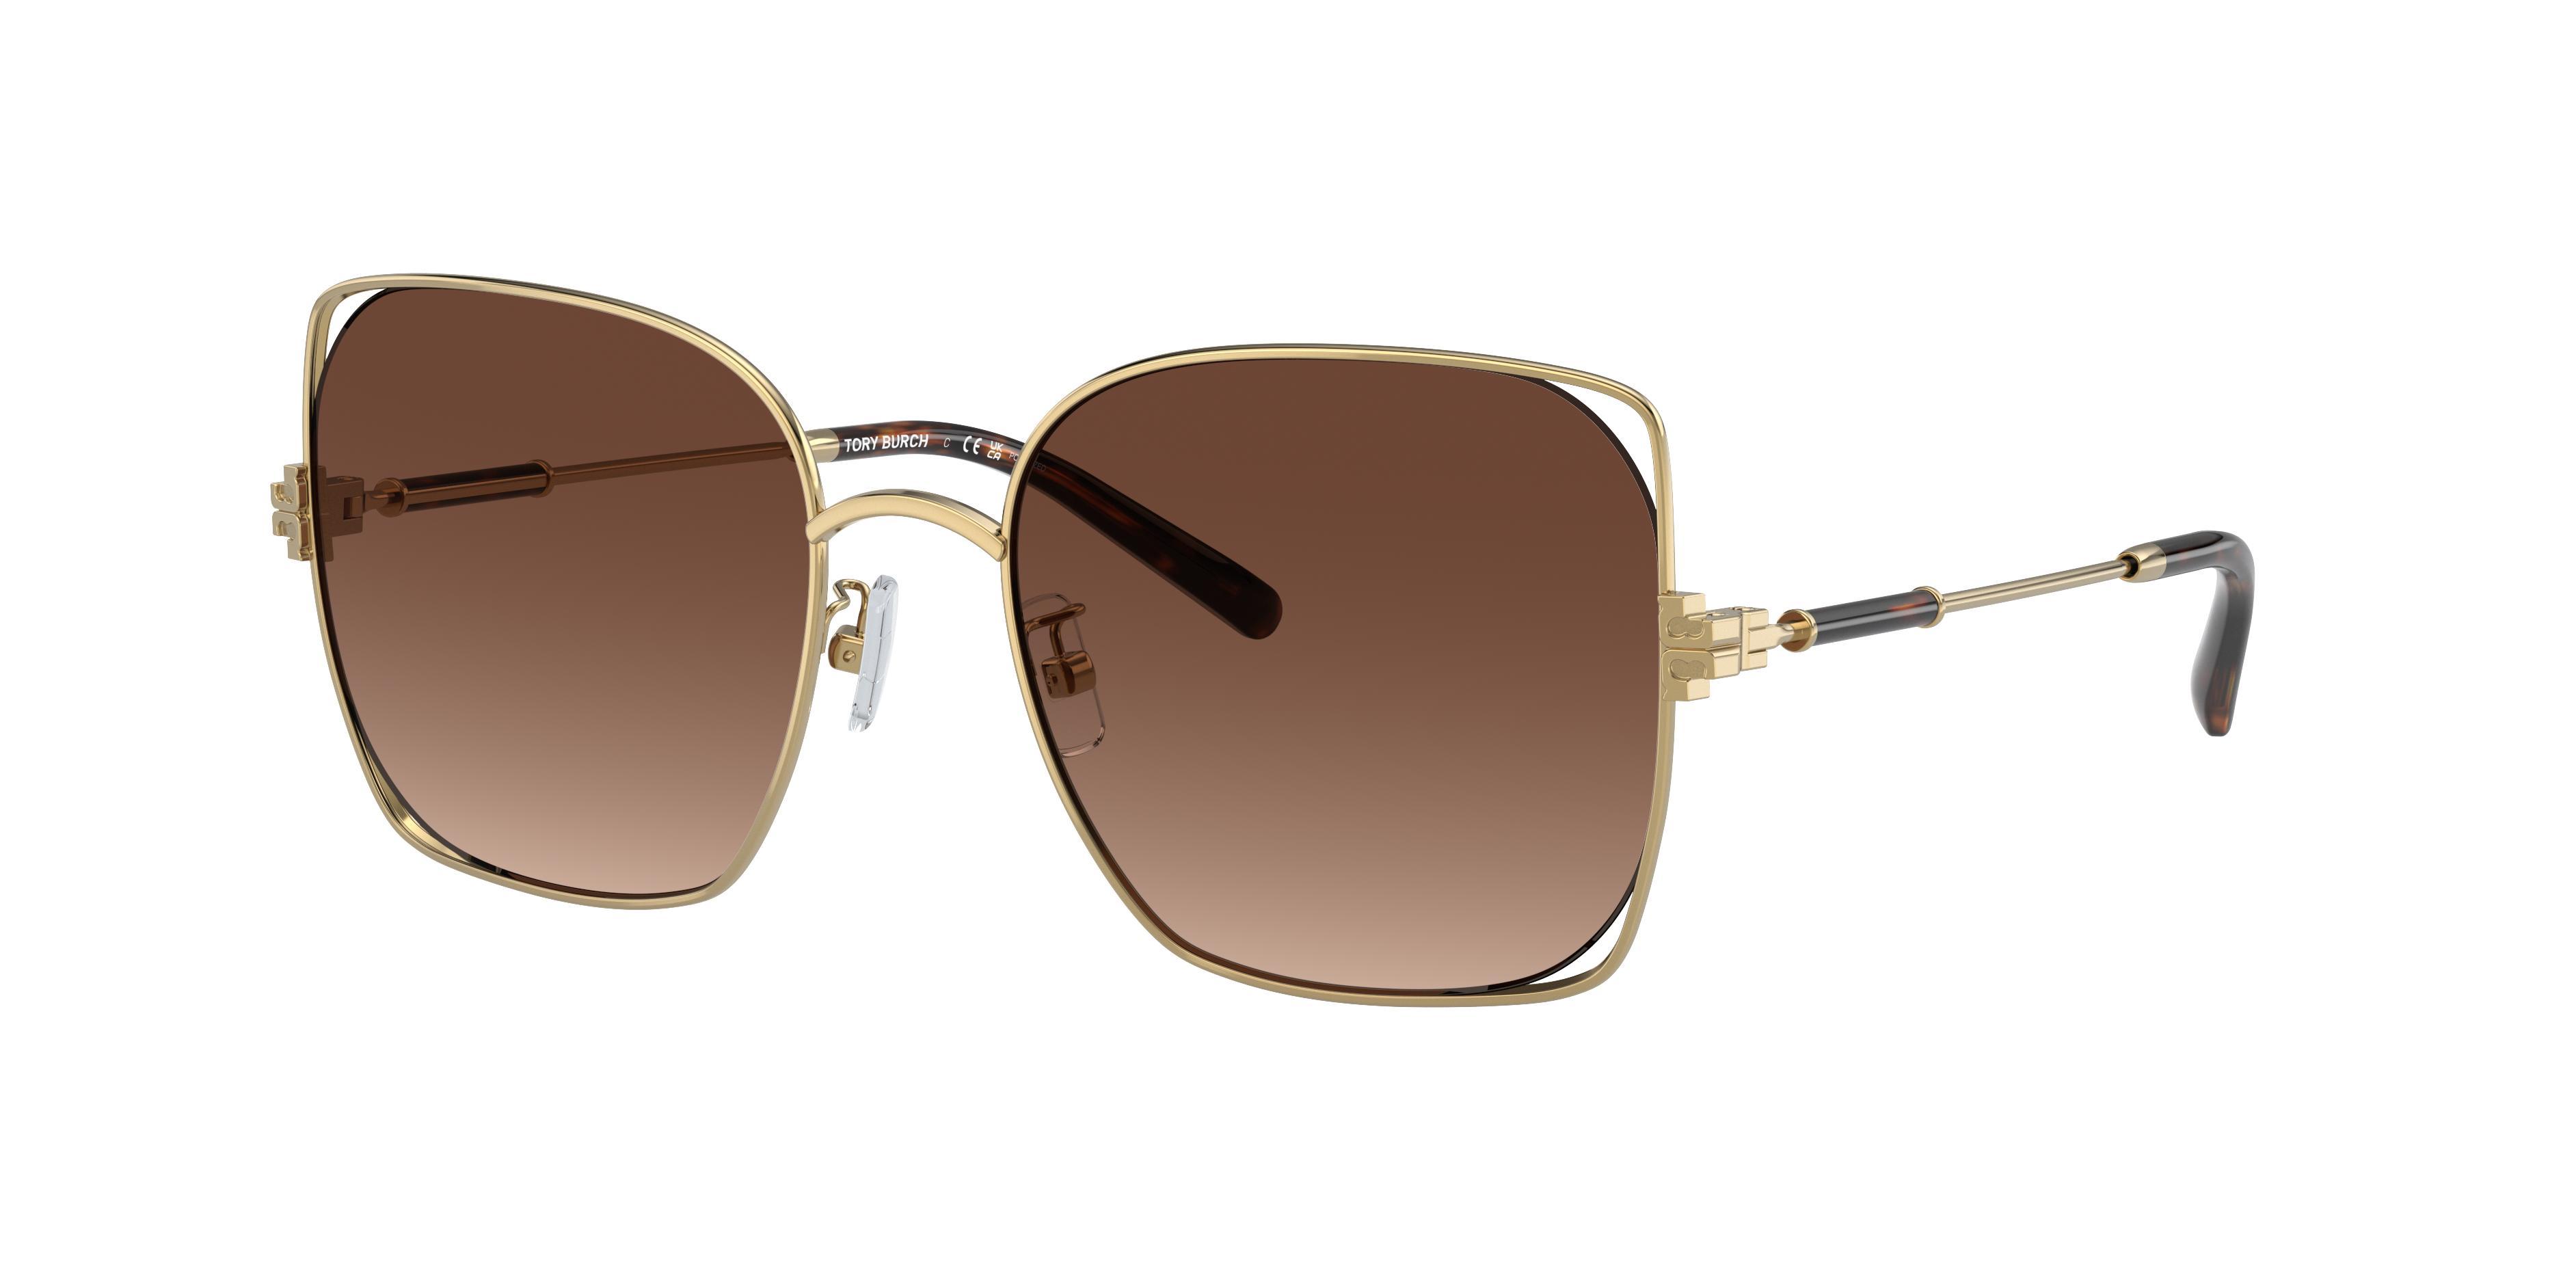 Tory Burch Womens 0TY6097 55mm Gradient Gold Polarized Square Sunglasses Product Image